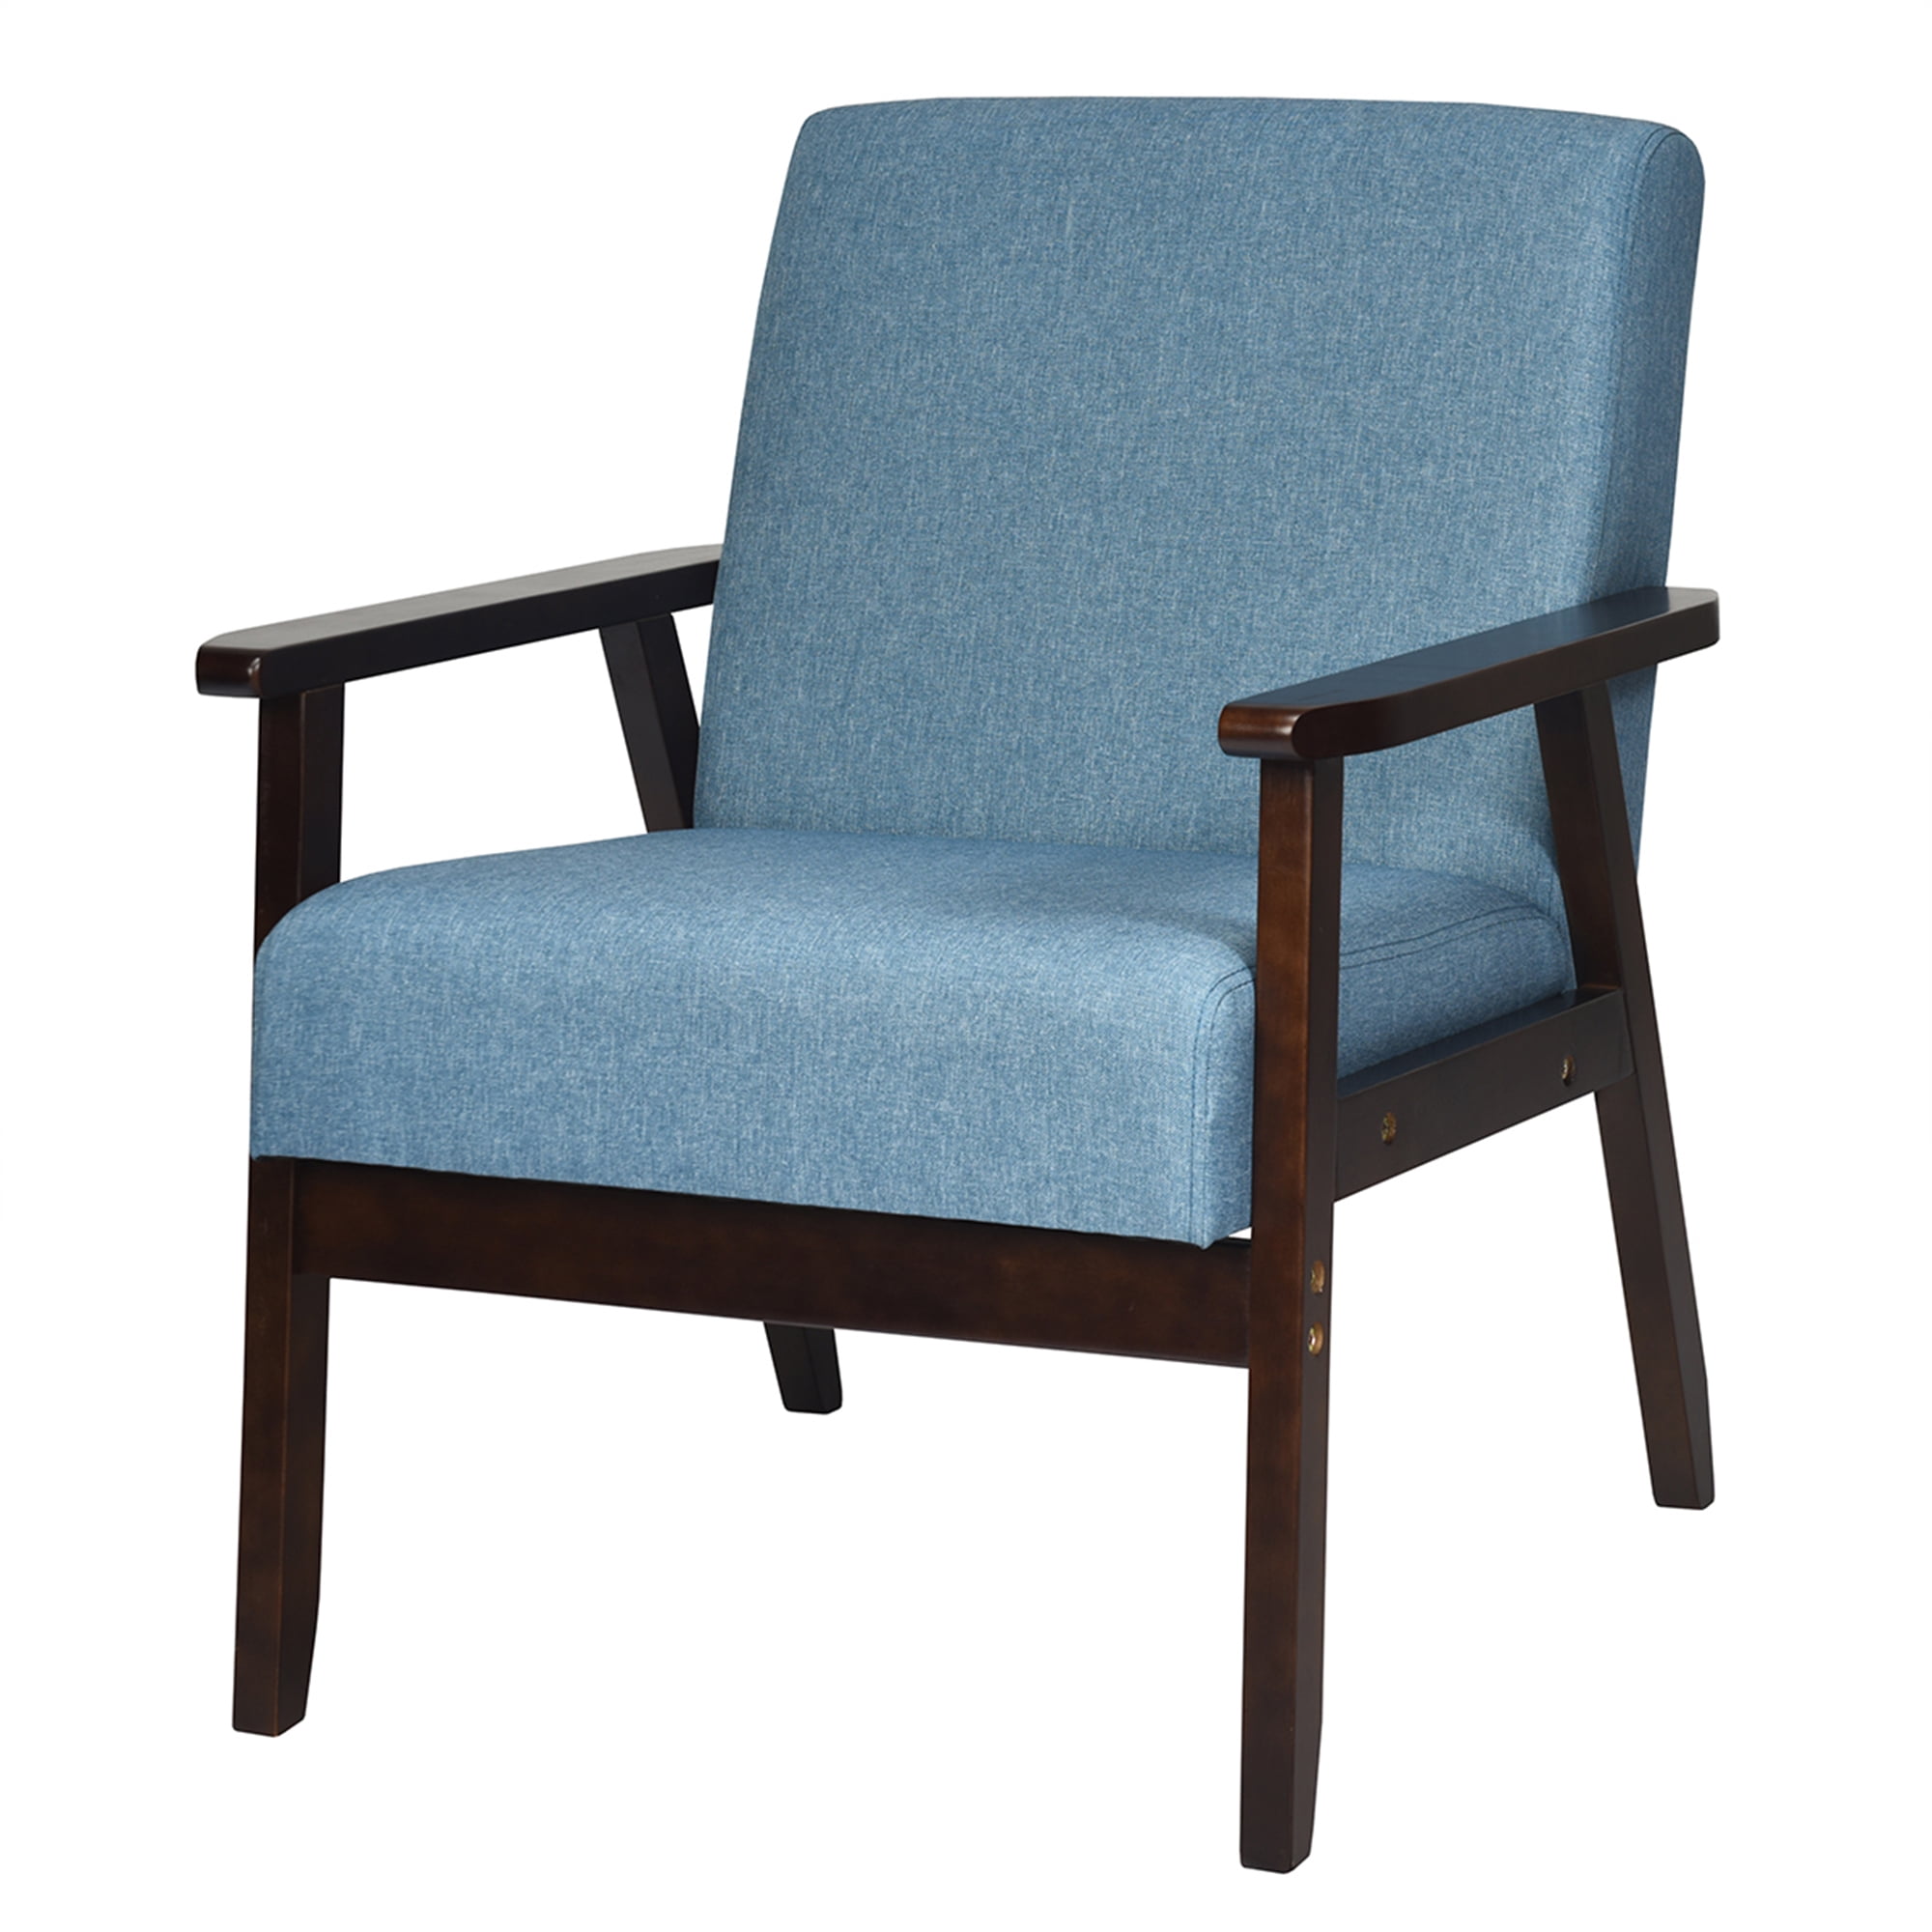 Gymax Wooden Upholstered Accent Chair Fabric Armchair Home Office Blue